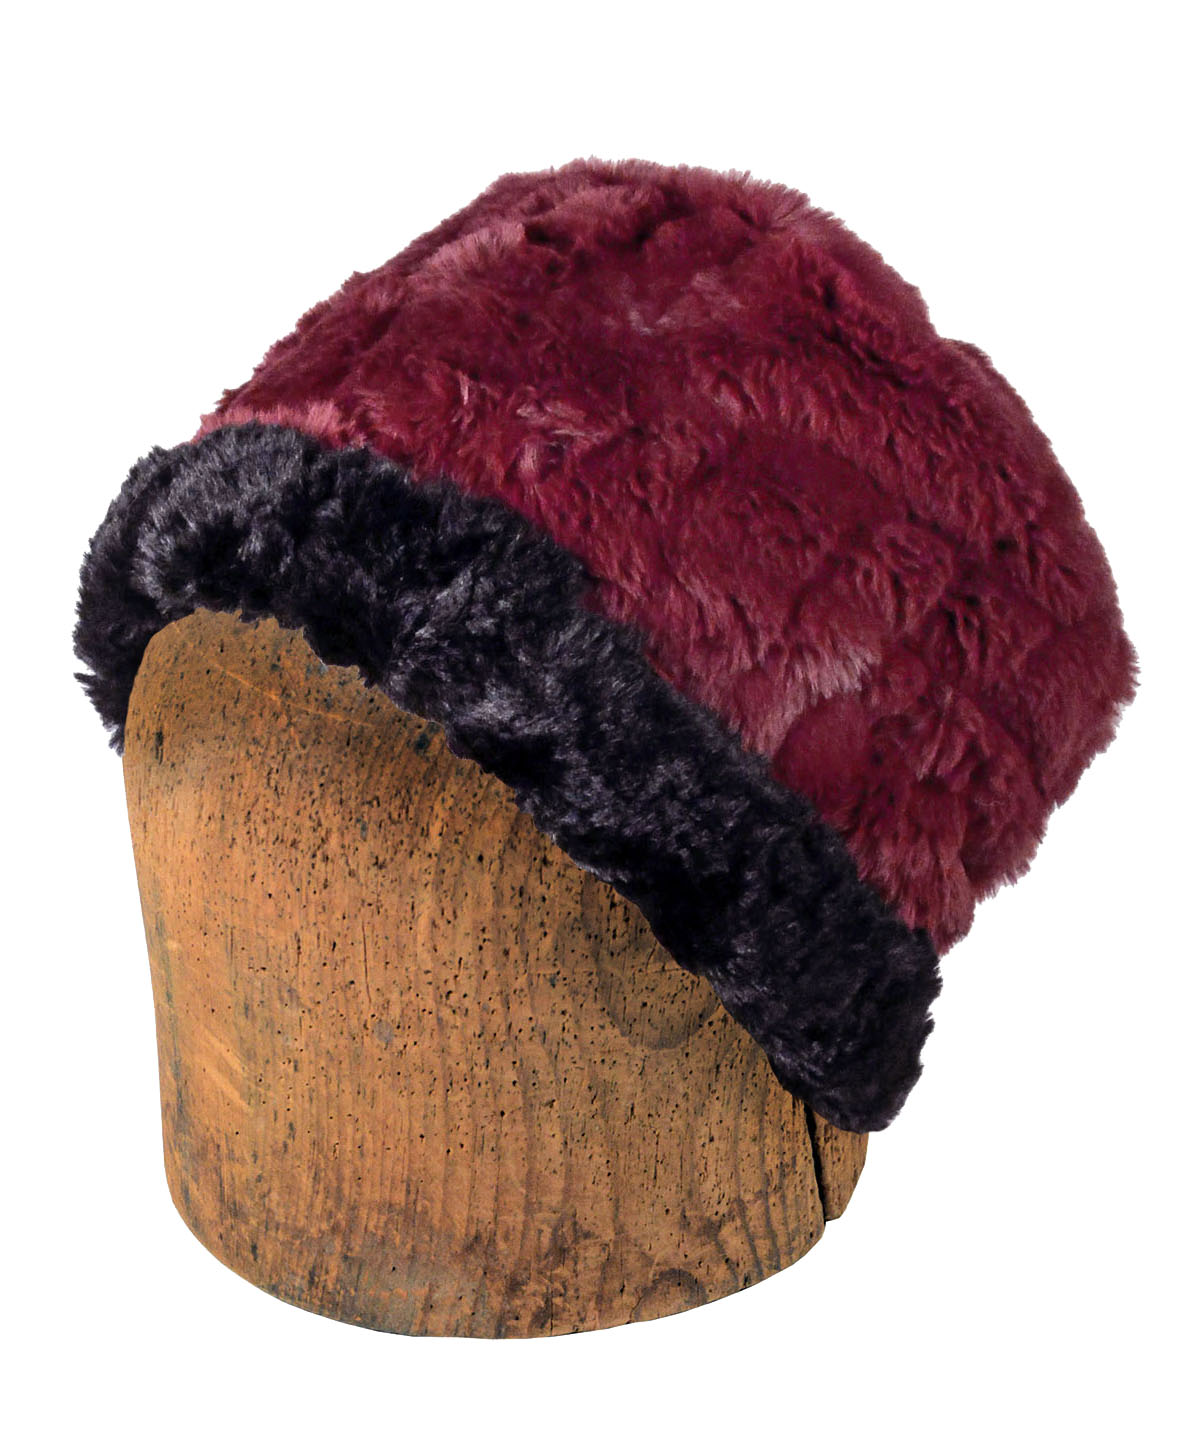 Men's 2-tone Cuffed Pillbox, Reversed | Luxury Faux Fur in Cranberry Creek and Cuddly Black Faux Fur | Handmade in Seattle WA by Pandemonium Millinery USA